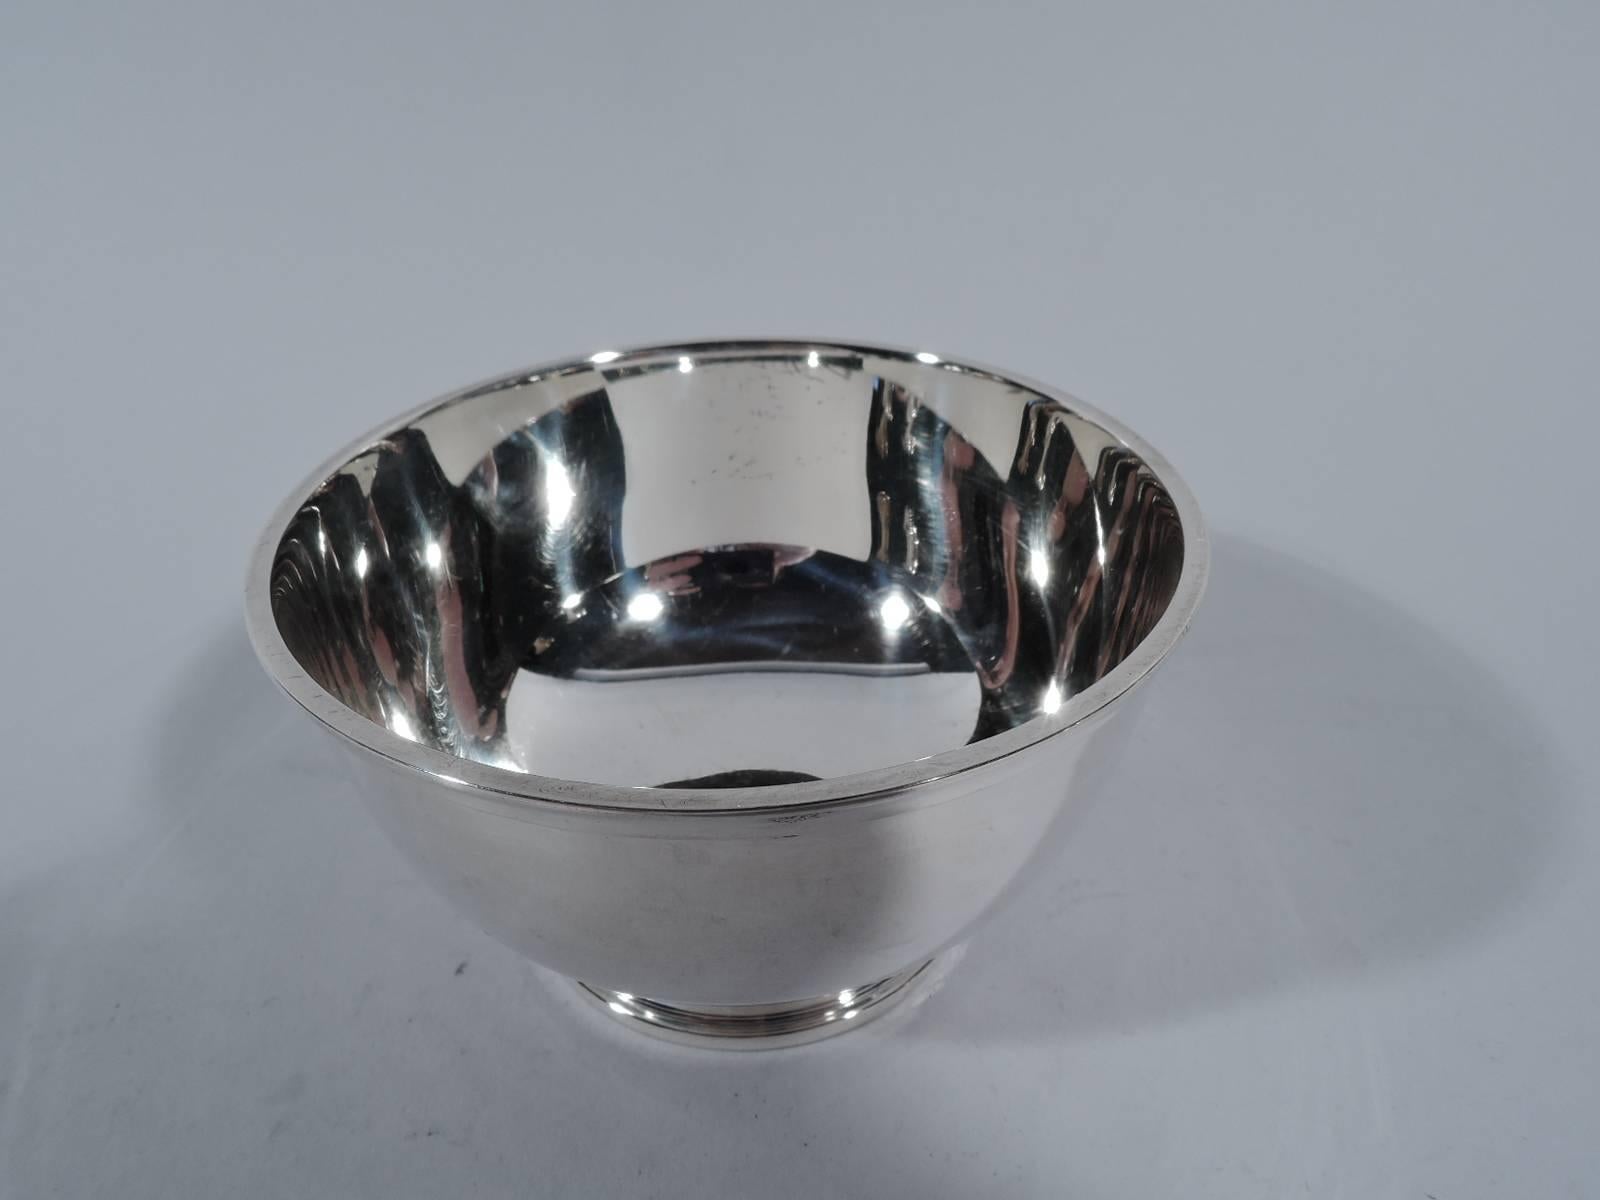 Sweet and small sterling silver bowl. Made by Tiffany & Co. in New York. Traditional Revere form with curved sides, molded rim, and stepped foot. Hallmark includes pattern no. 22938 and director’s letter M (1947-56). Weight: 4 troy ounces.